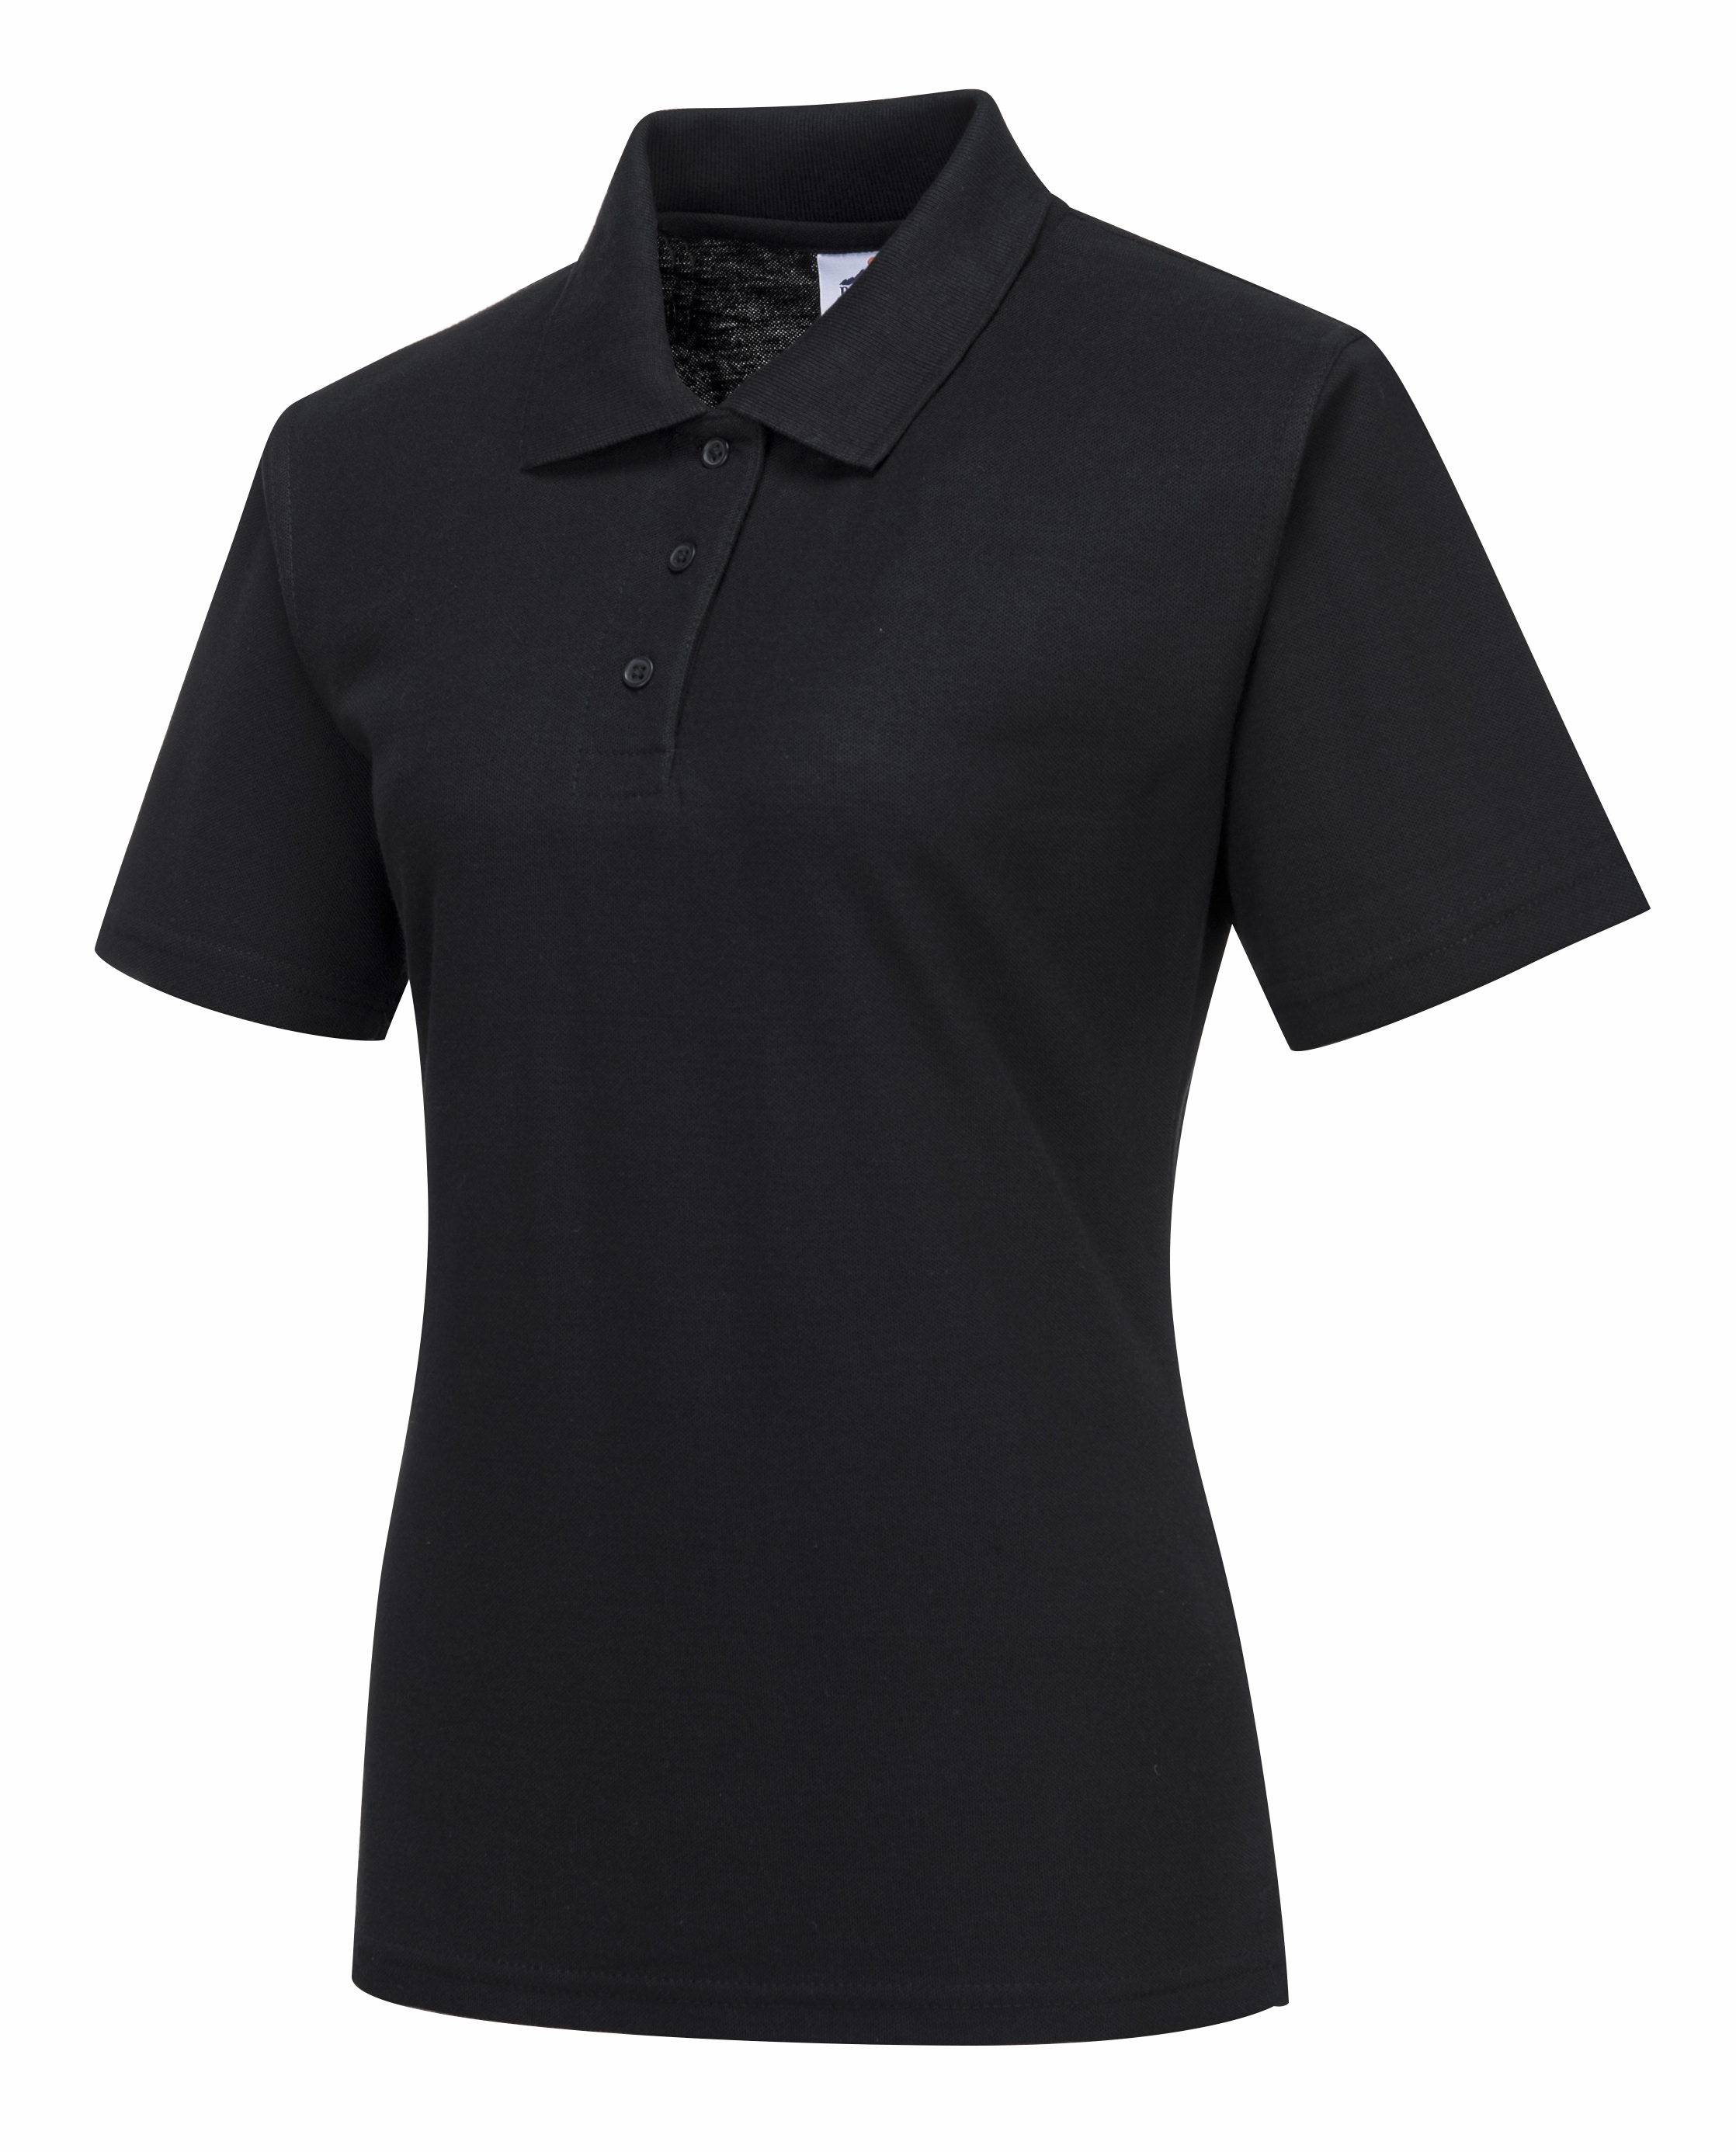 ax-httpss3.eu-west-2.amazonaws.comwebsystemstmp_for_downloadportwest-naples-ladies-polo-shirt-black.jpeg